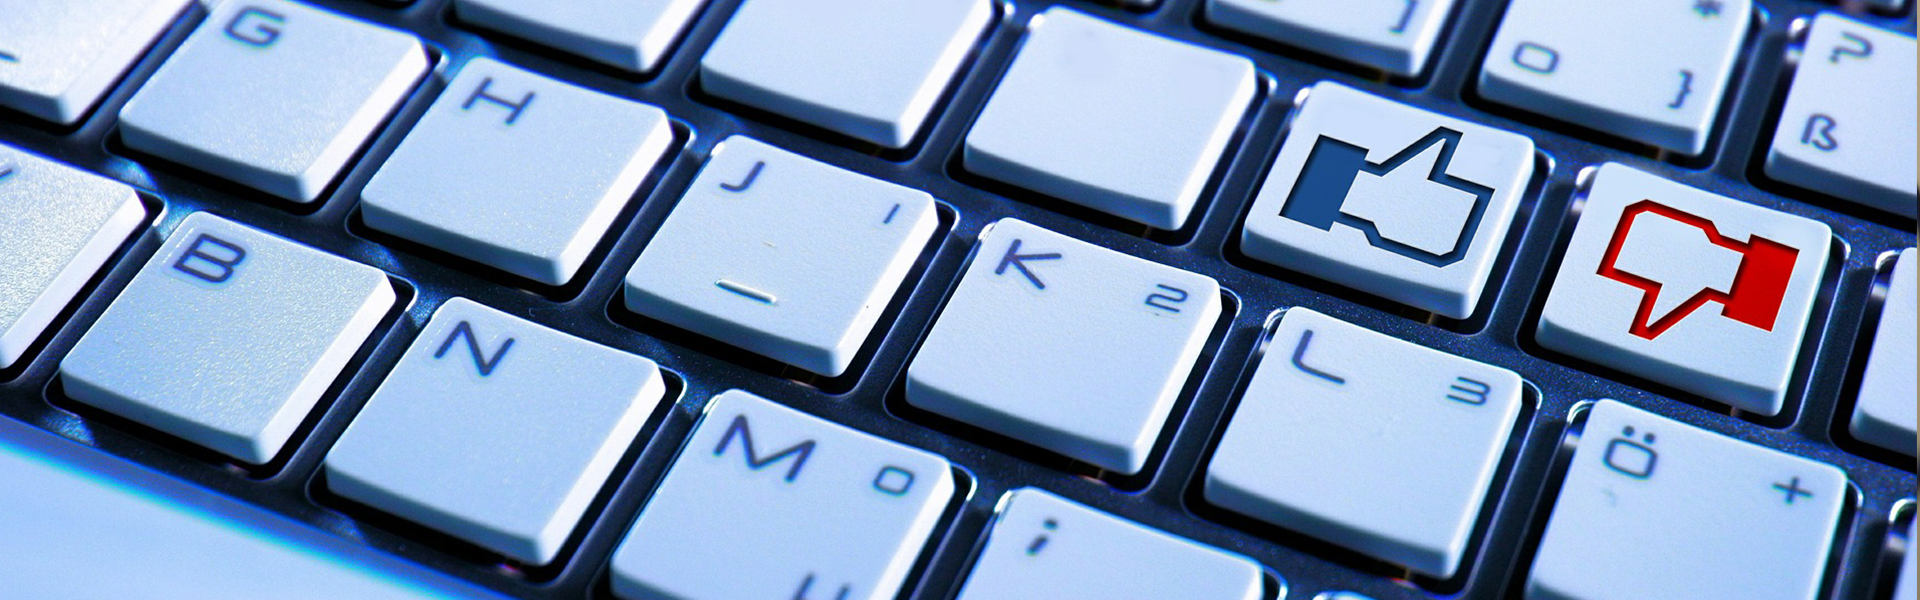 Laptop keyboard shows thumbs-up and thumbs-down icons.